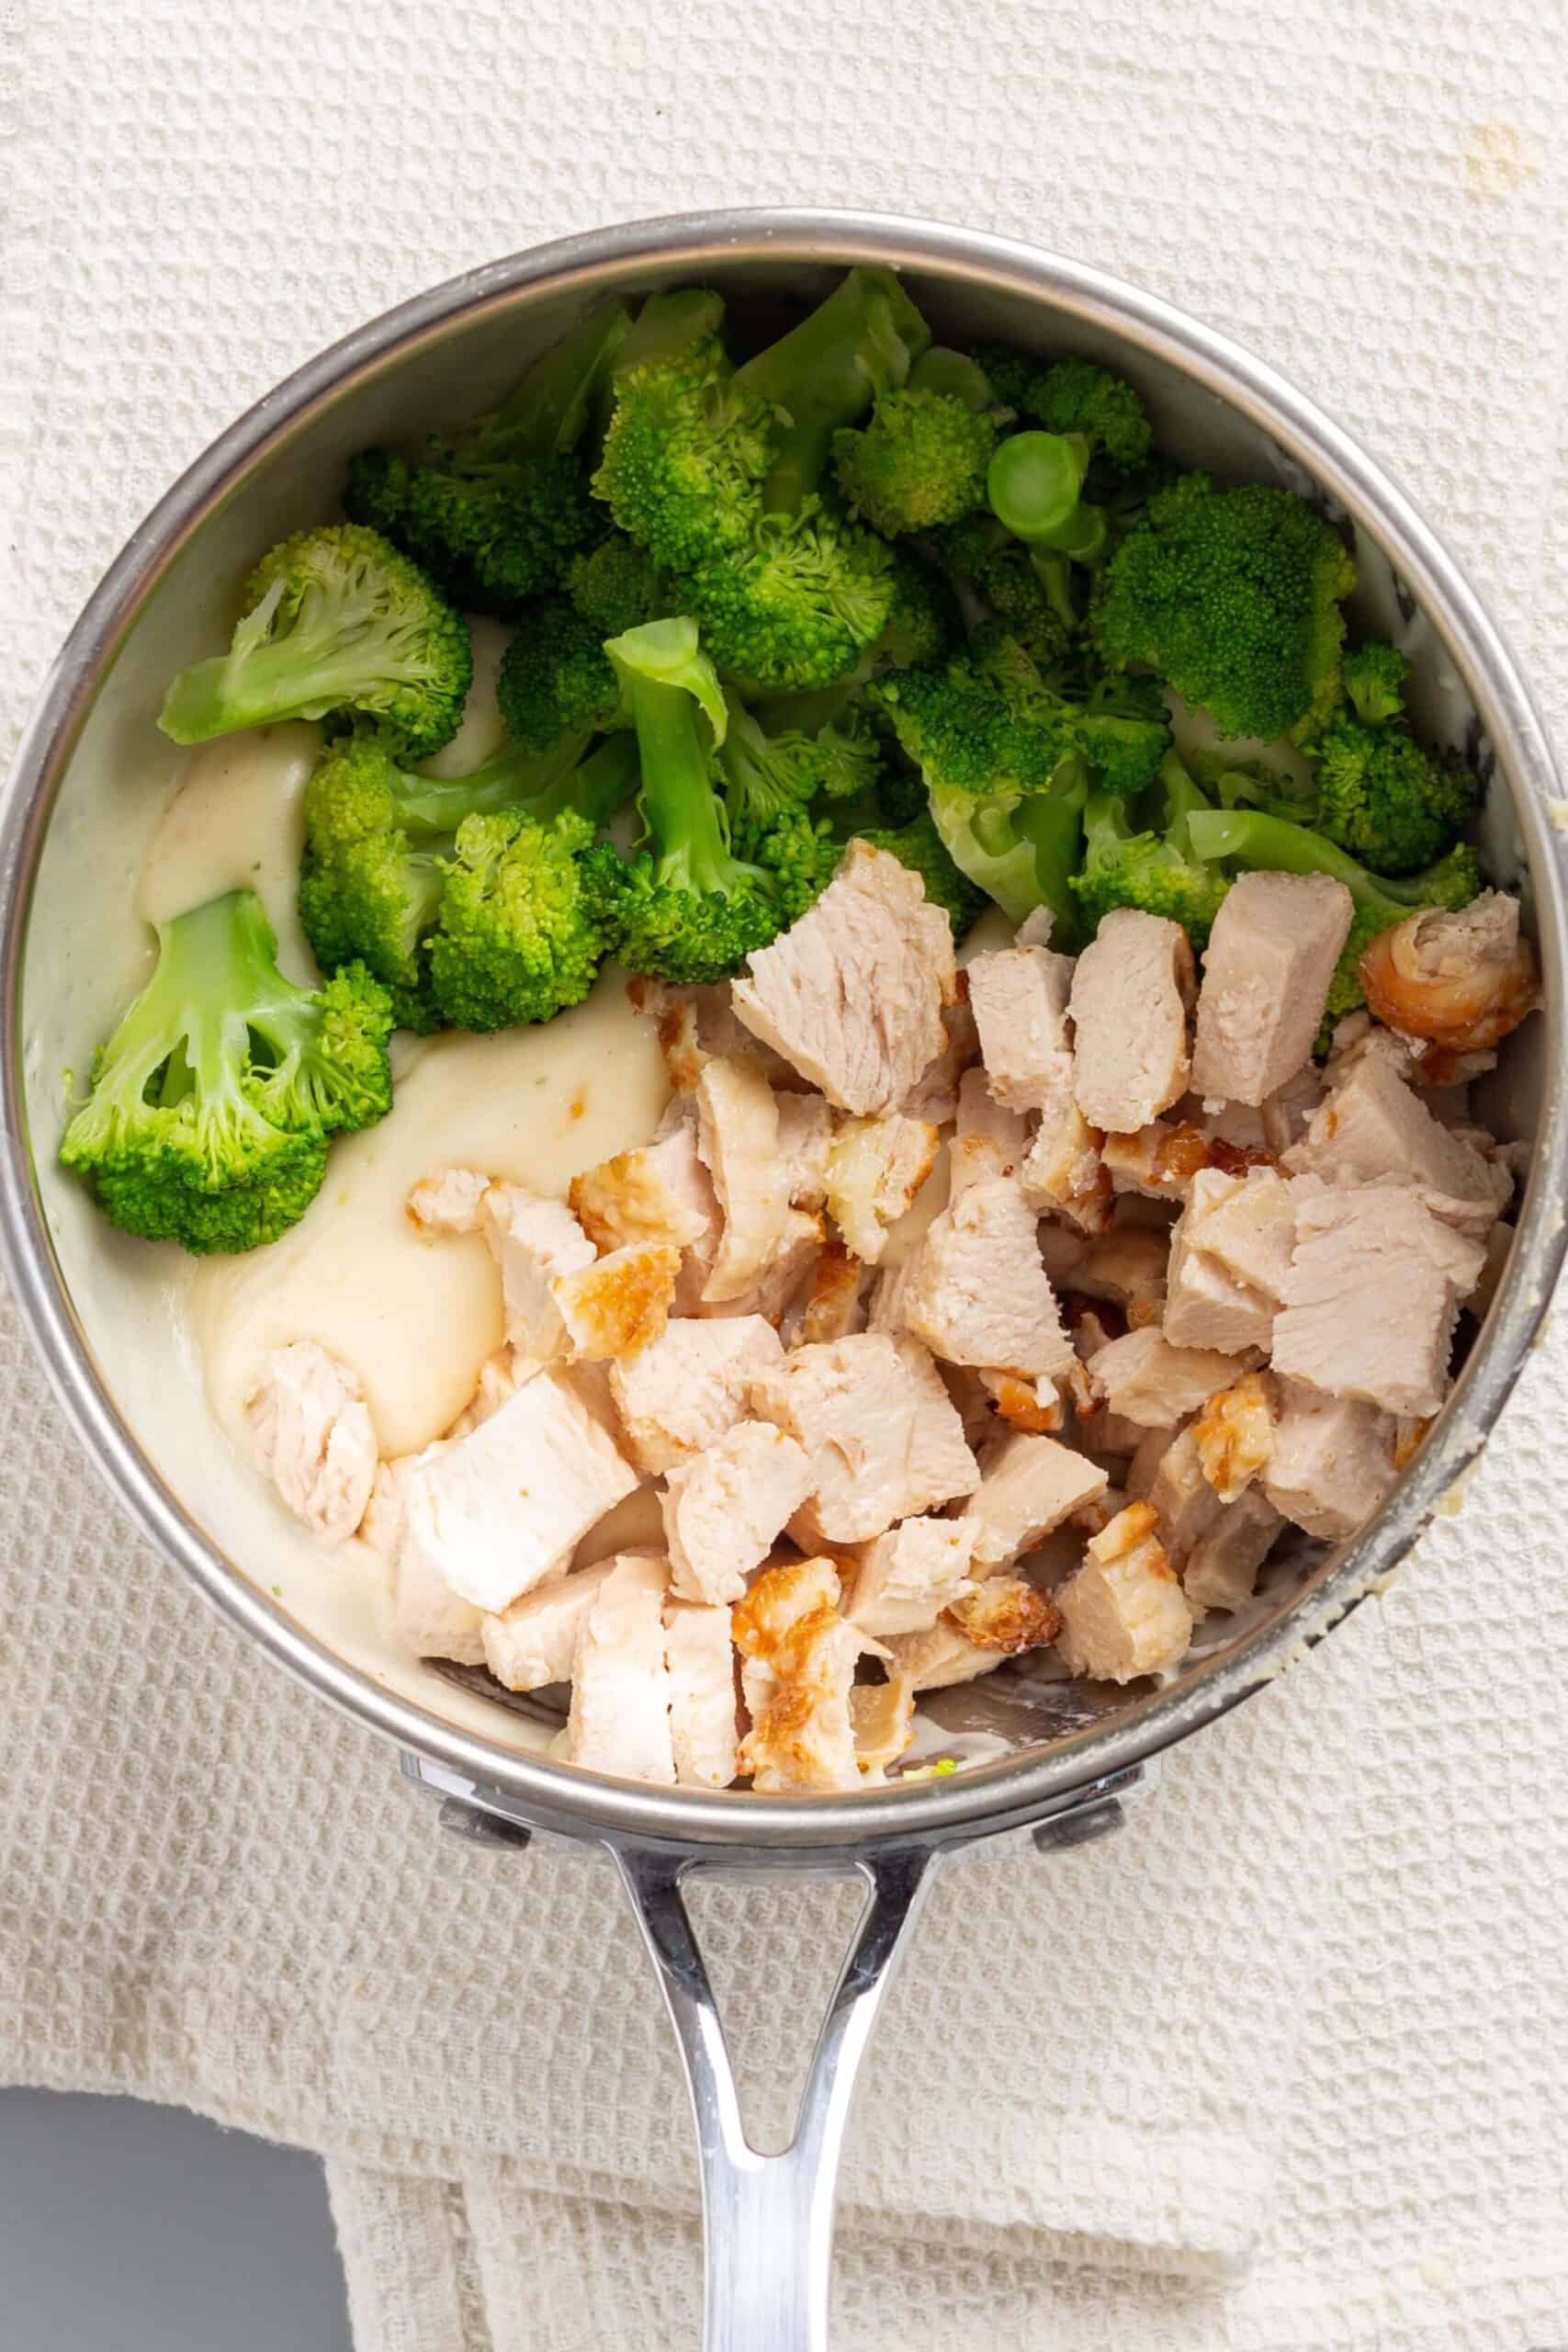 Broccoli and chicken added to sauce mixture.